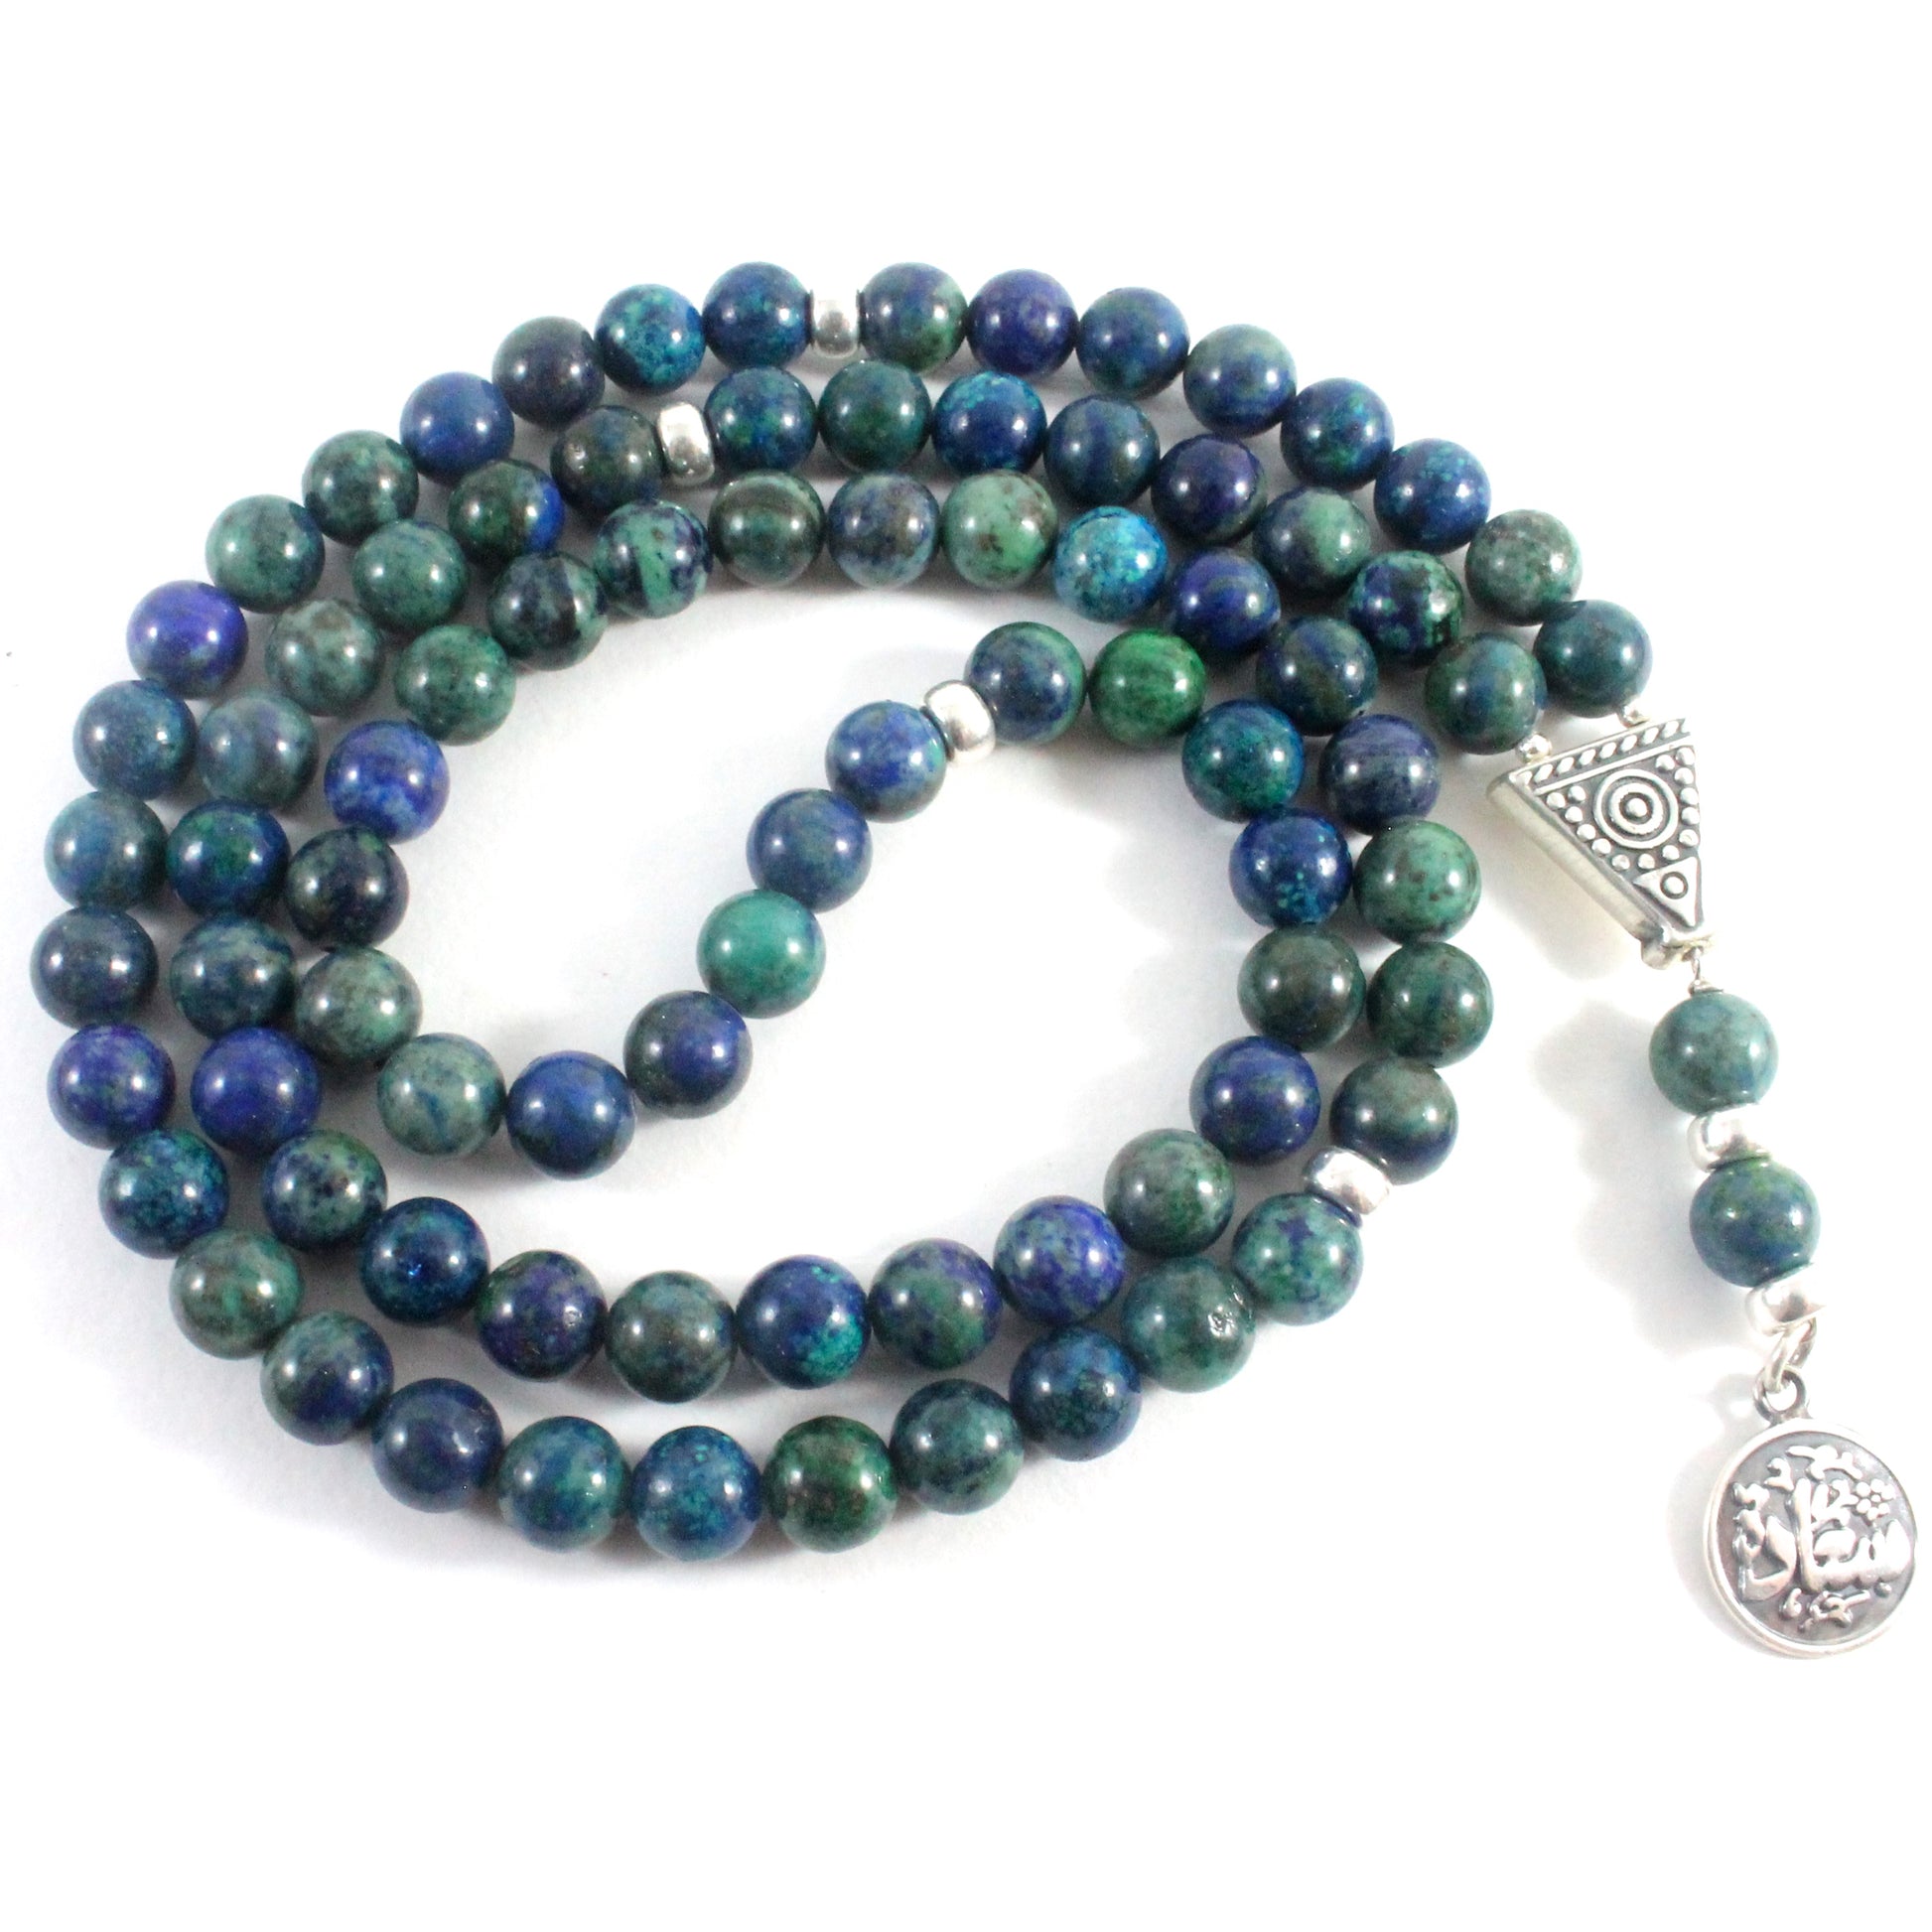 3-in-1 Azurite Necklace/Bracelet/Prayer beads -The Ricci District